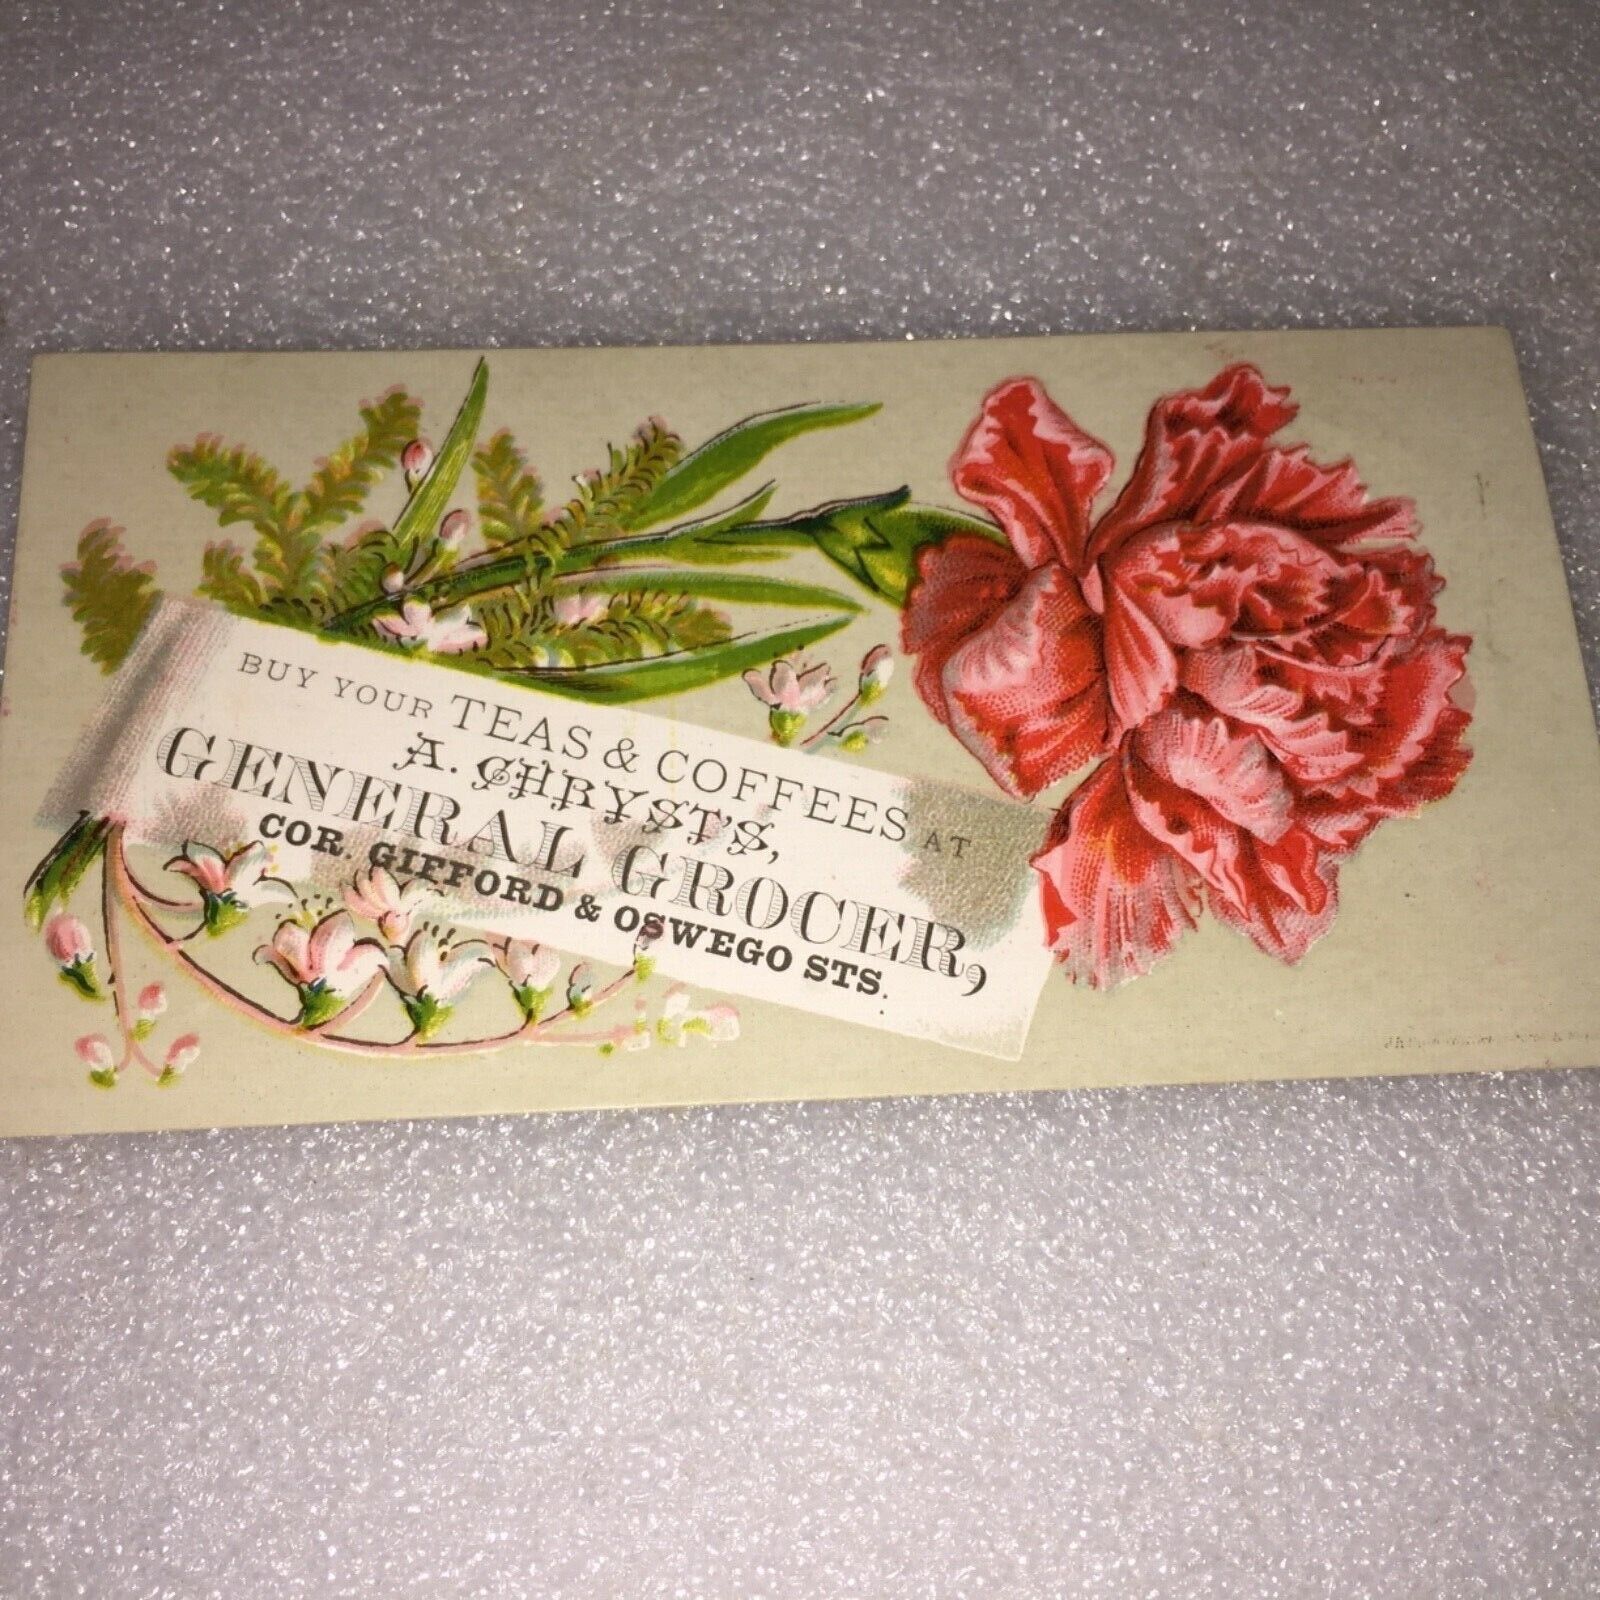 VINTAGE A. CHRYST’S GEN. GROCER GIFFORD & OSWEGO ST. SYRACUSE,NY TRADE CARD